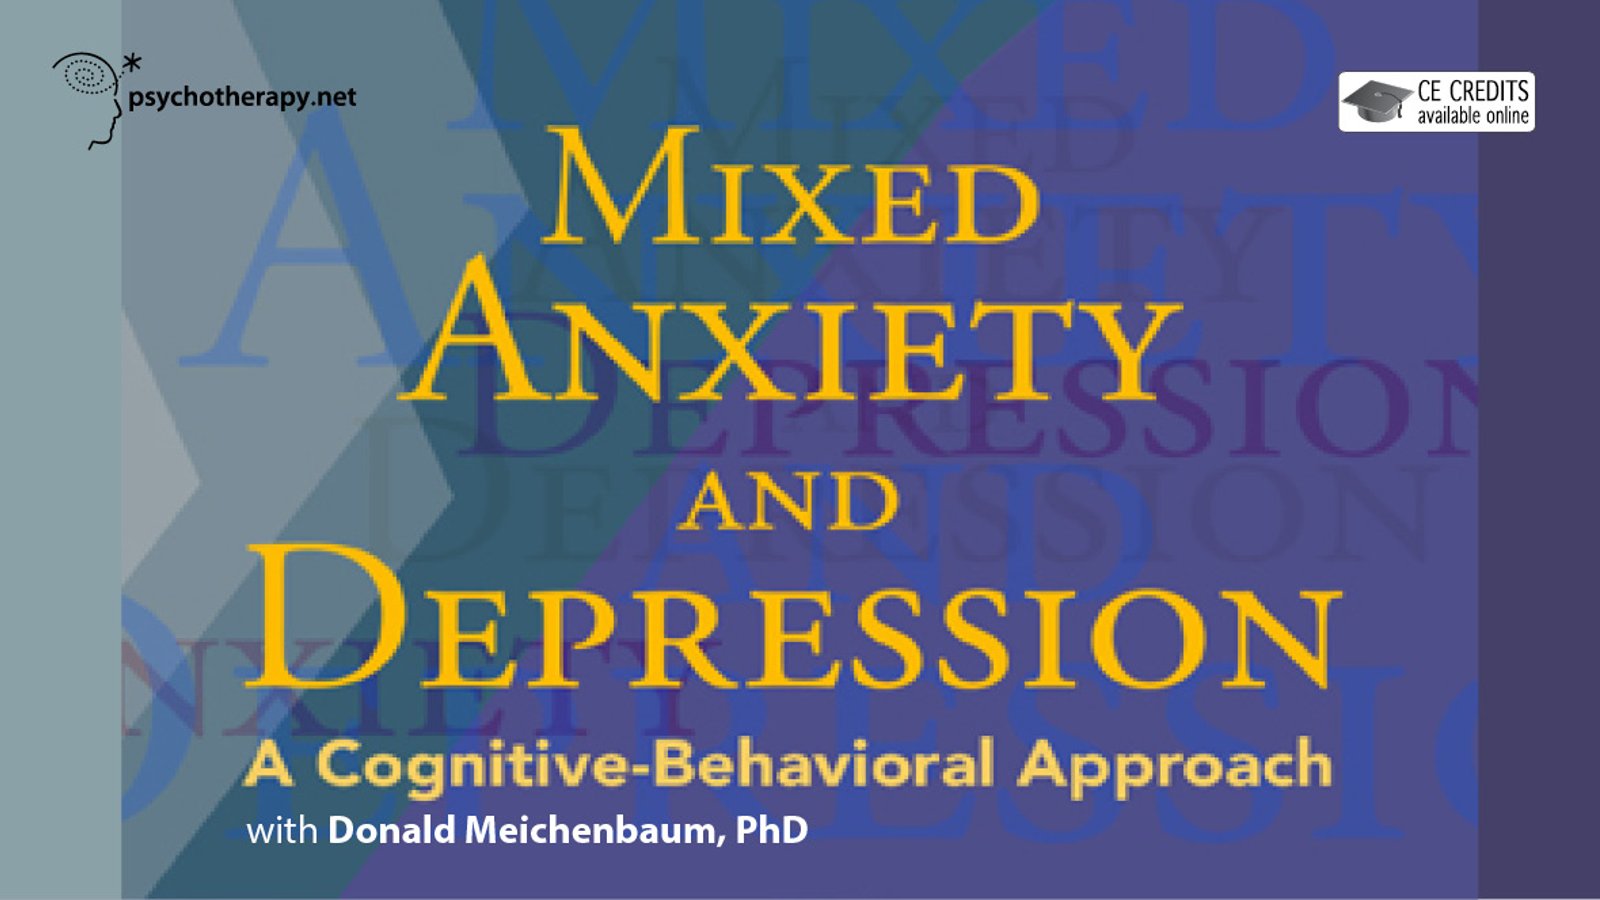 Mixed Anxiety and Depression - A Cognitive-Behavioral Approach with Donald Meichenbaum